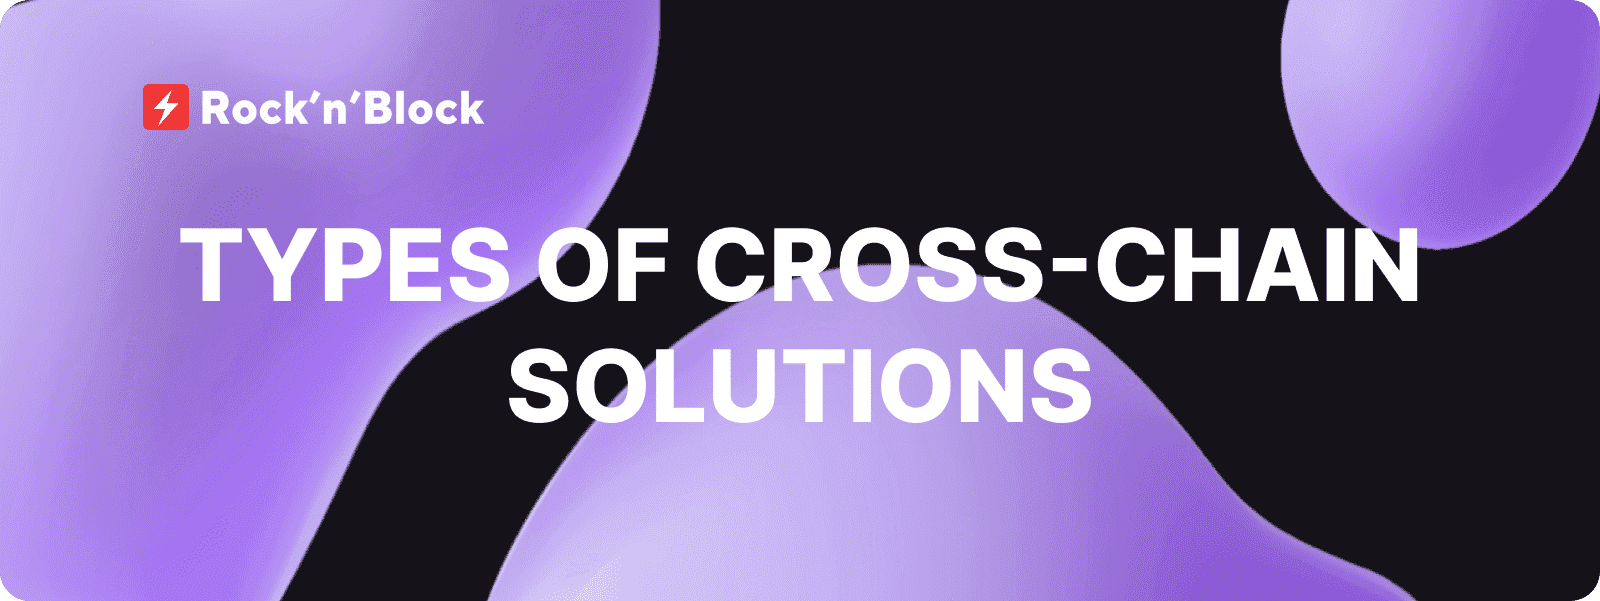 Types of Cross-Chain Solutions